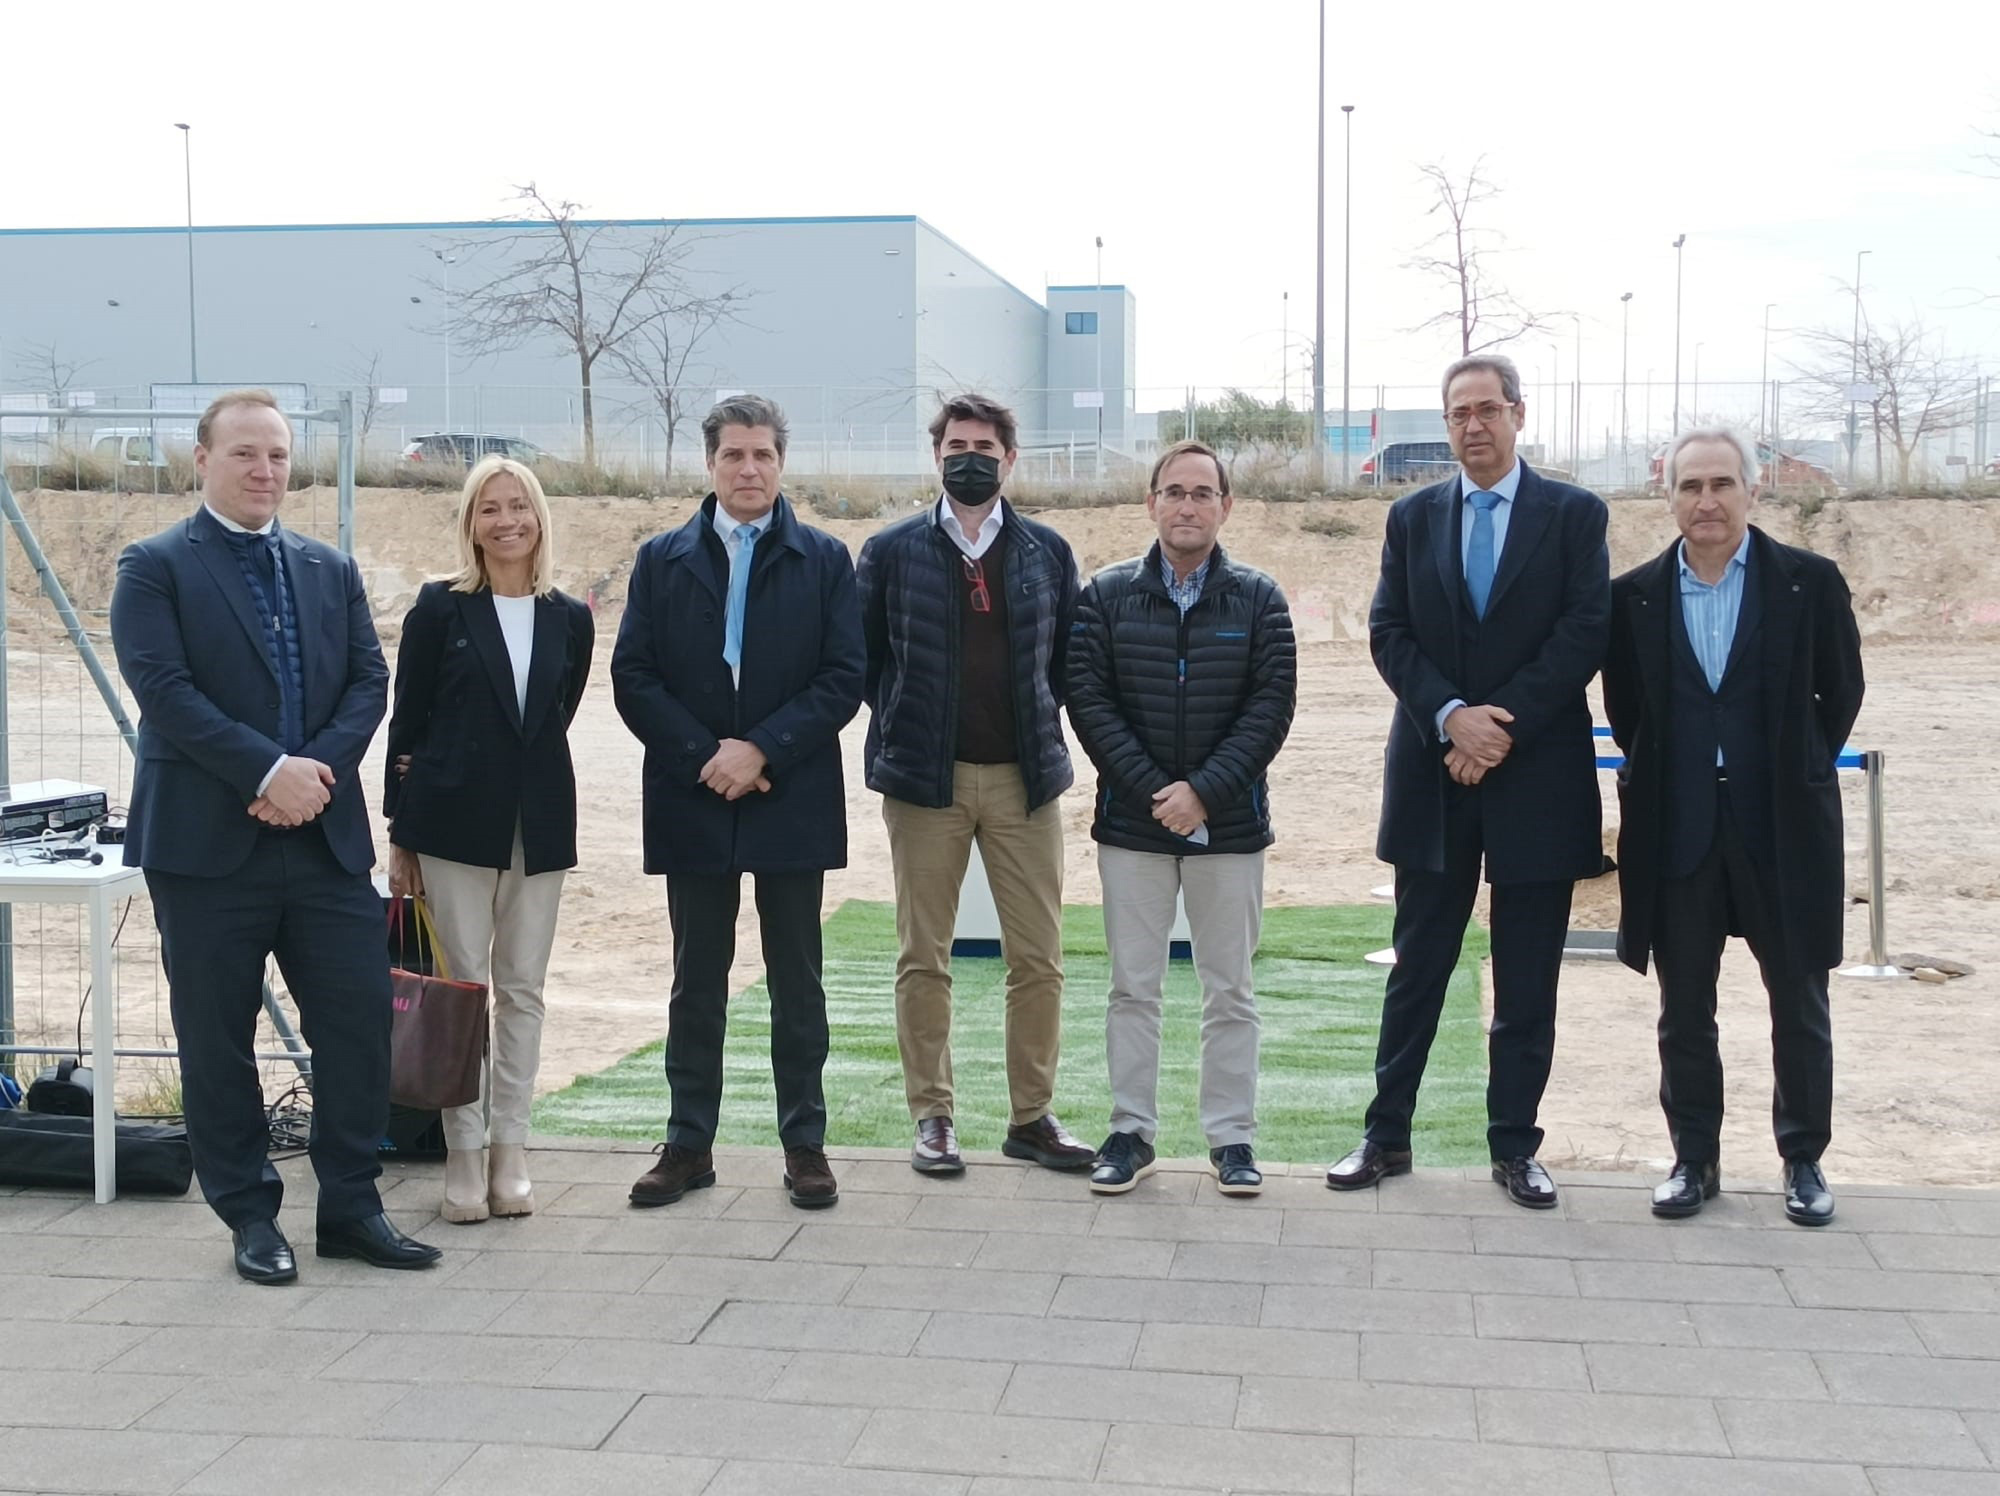 The foundation stone for Fersa Lab was laid in Zaragoza on 25 February 2022, with Carlos Oehling, CEO of Fersa Group, Fernando Used from Ingennus, Maria José Ballarín and Jose Luis Ezquerra from Obenasa, Pedro Dubón from Fersa, and other participants. 